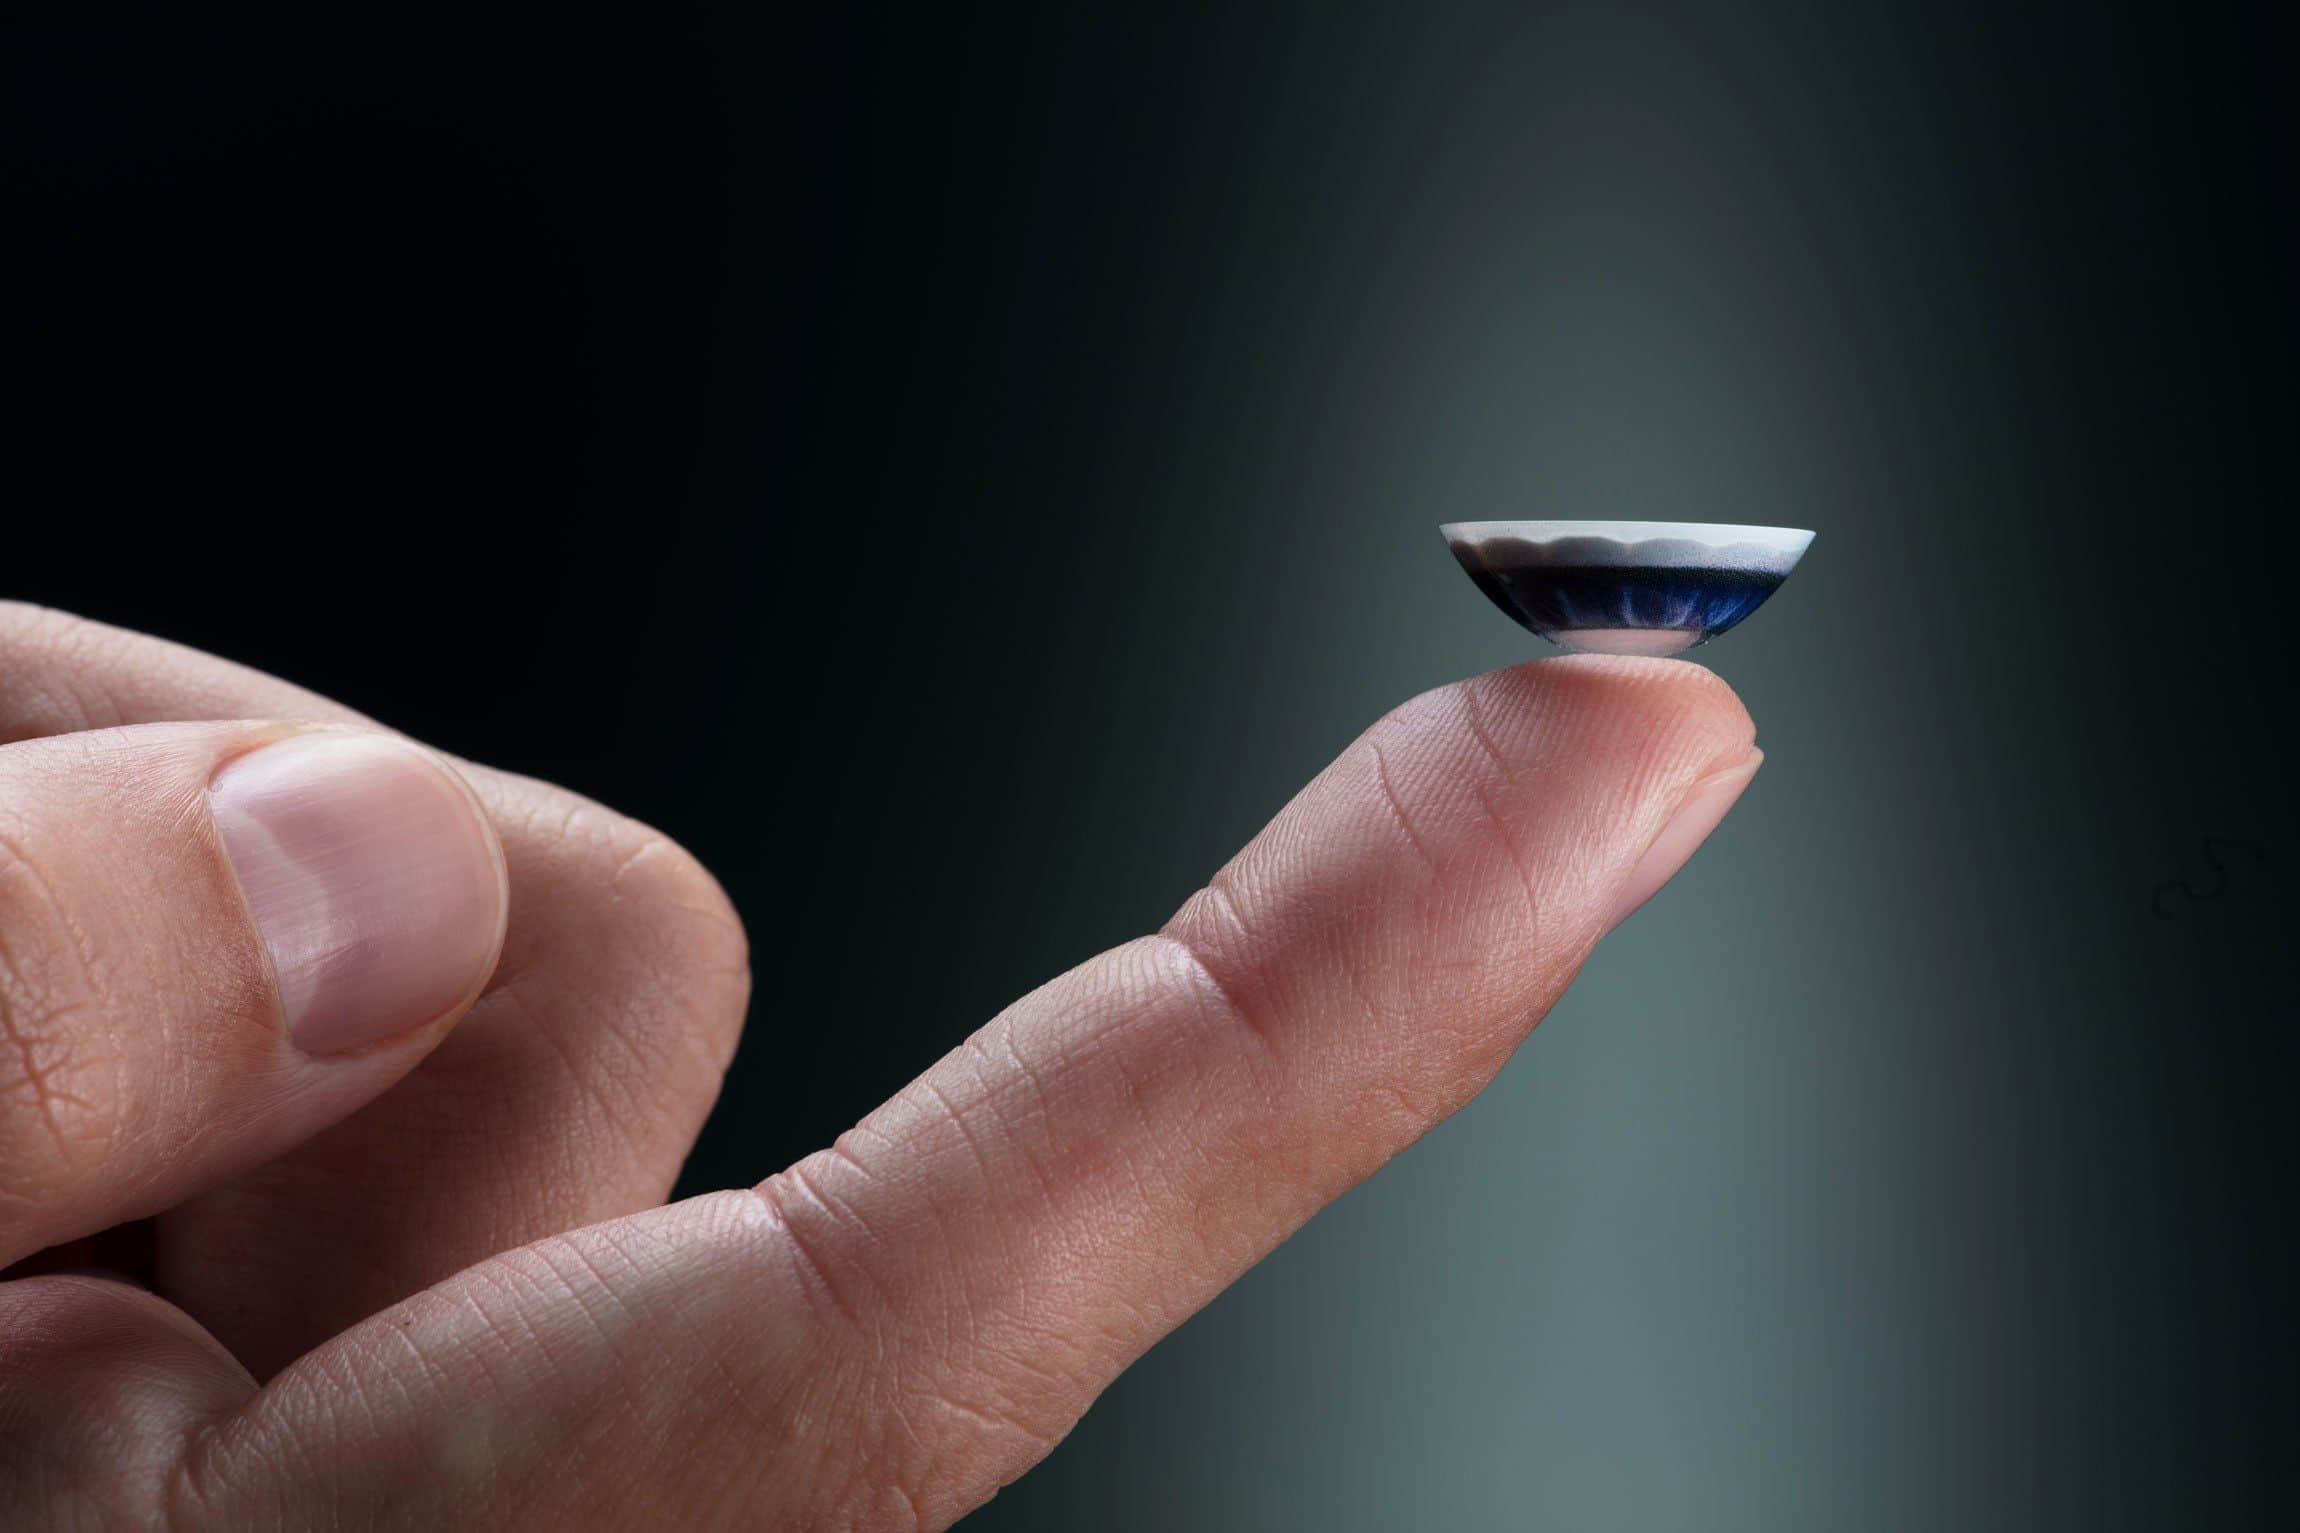 Can AR Contact Lenses Put the Future in Focus?